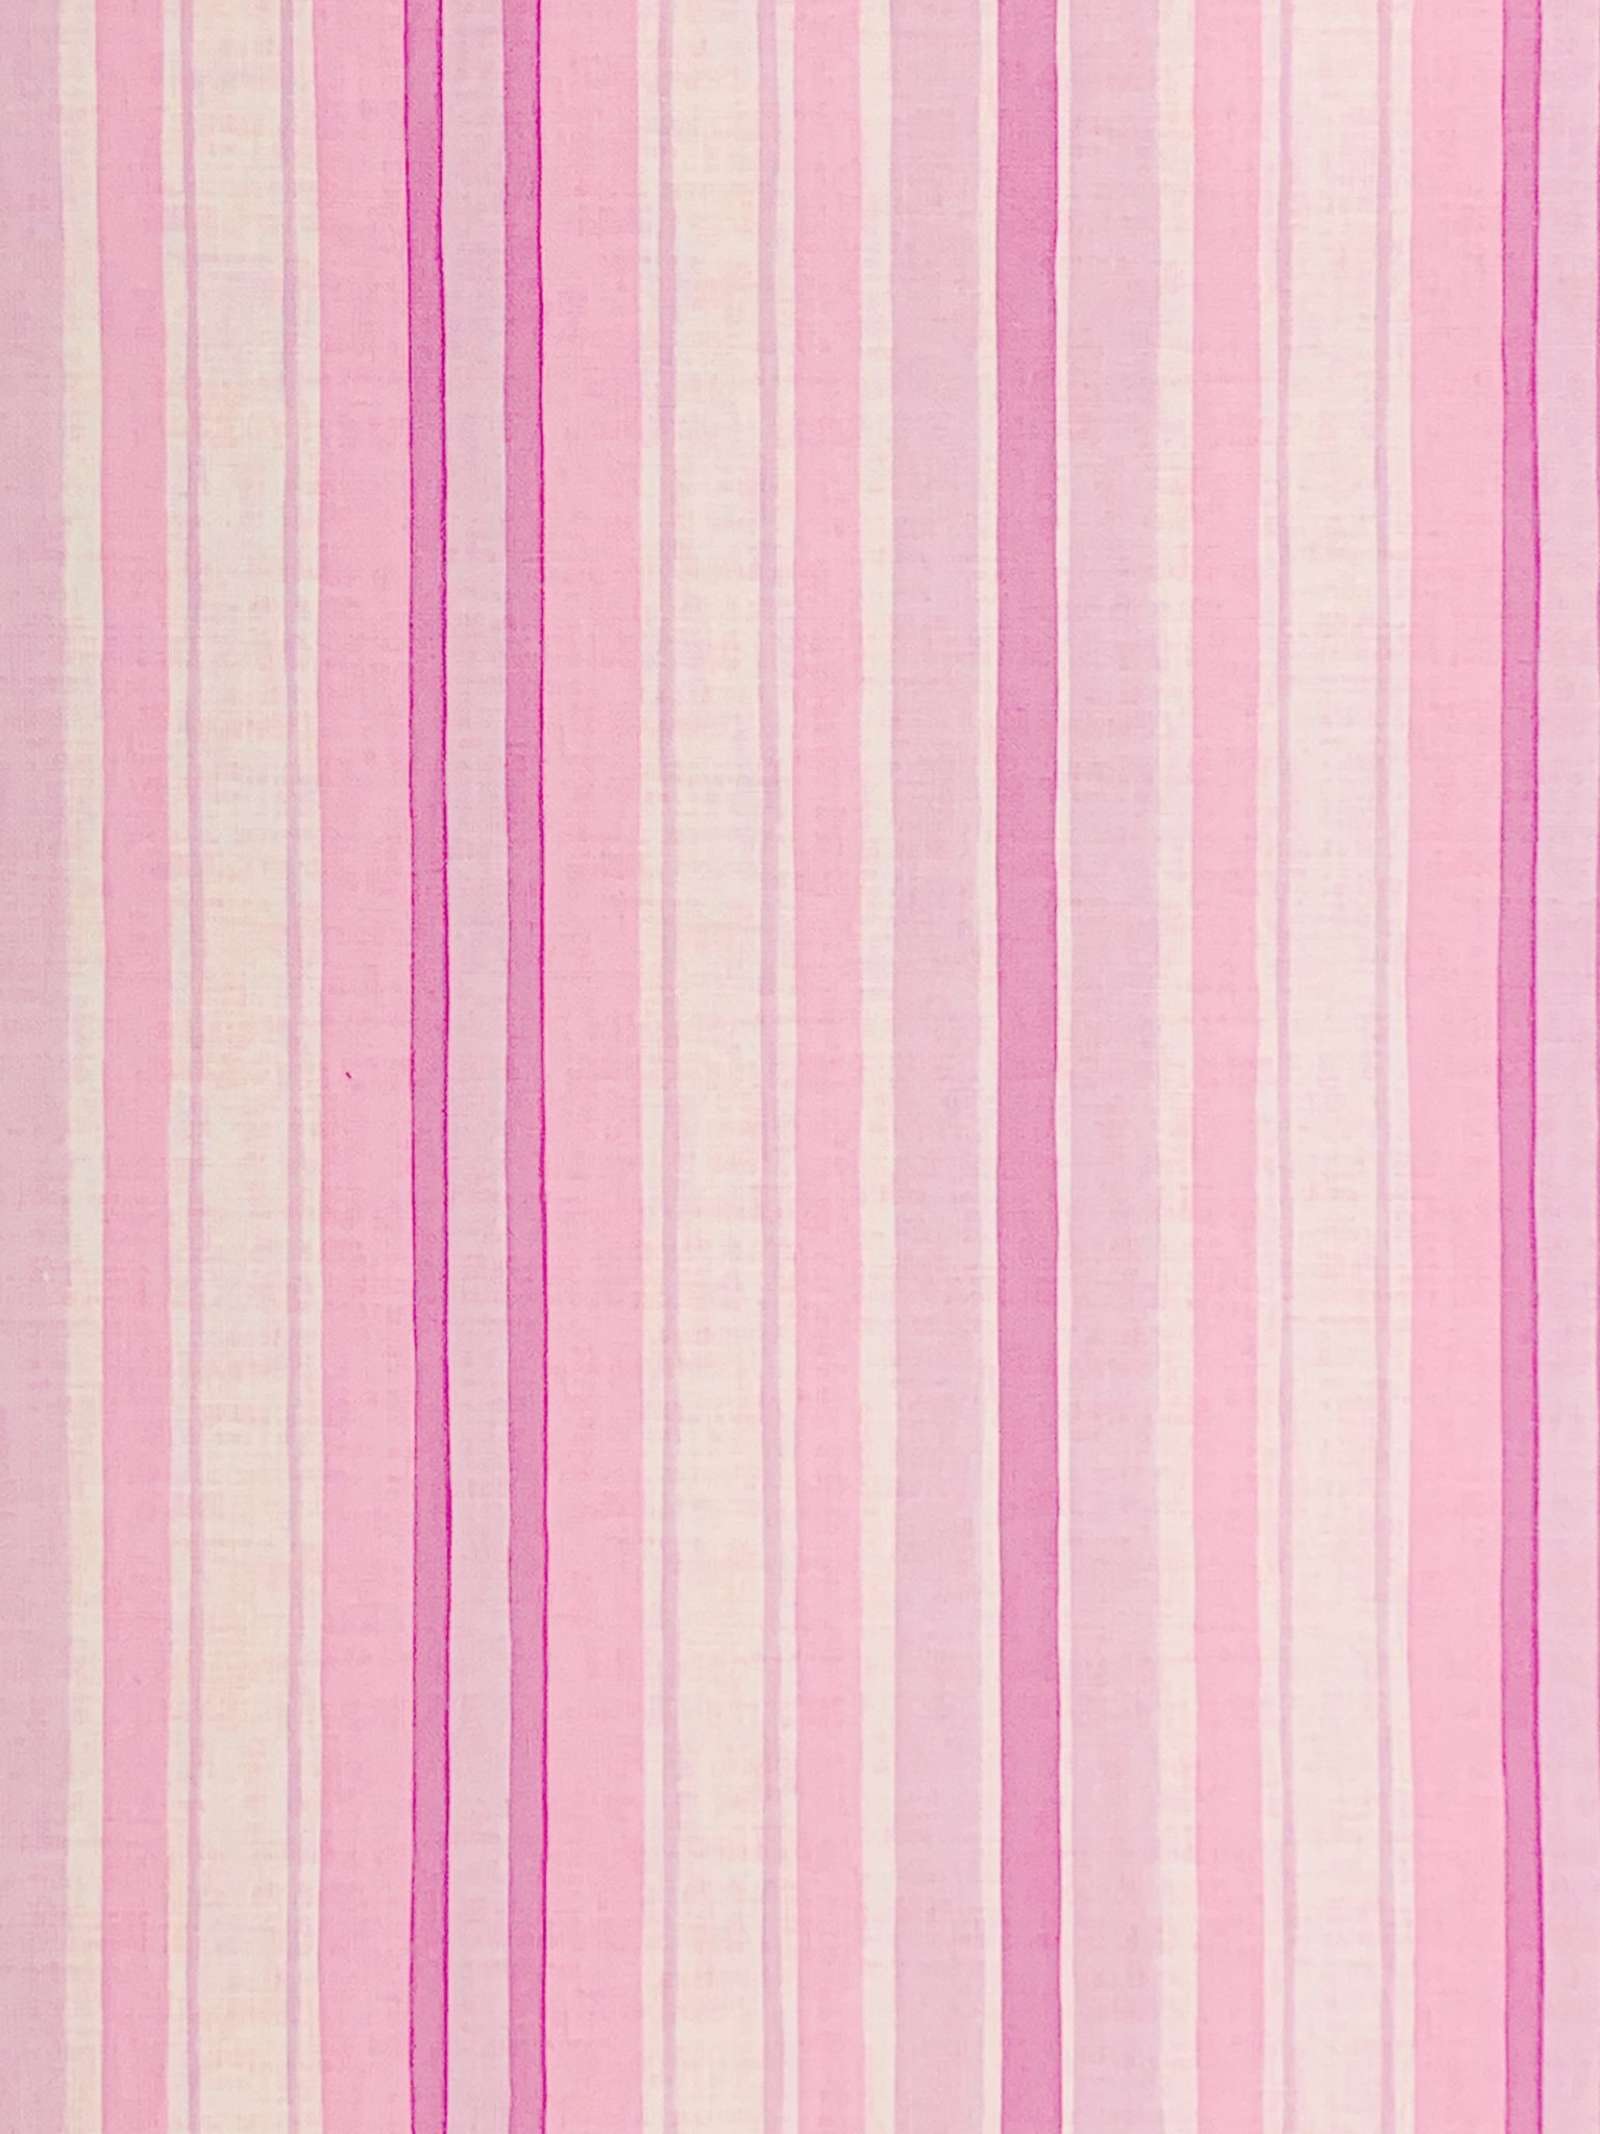 Pink Stripes Wallpapers